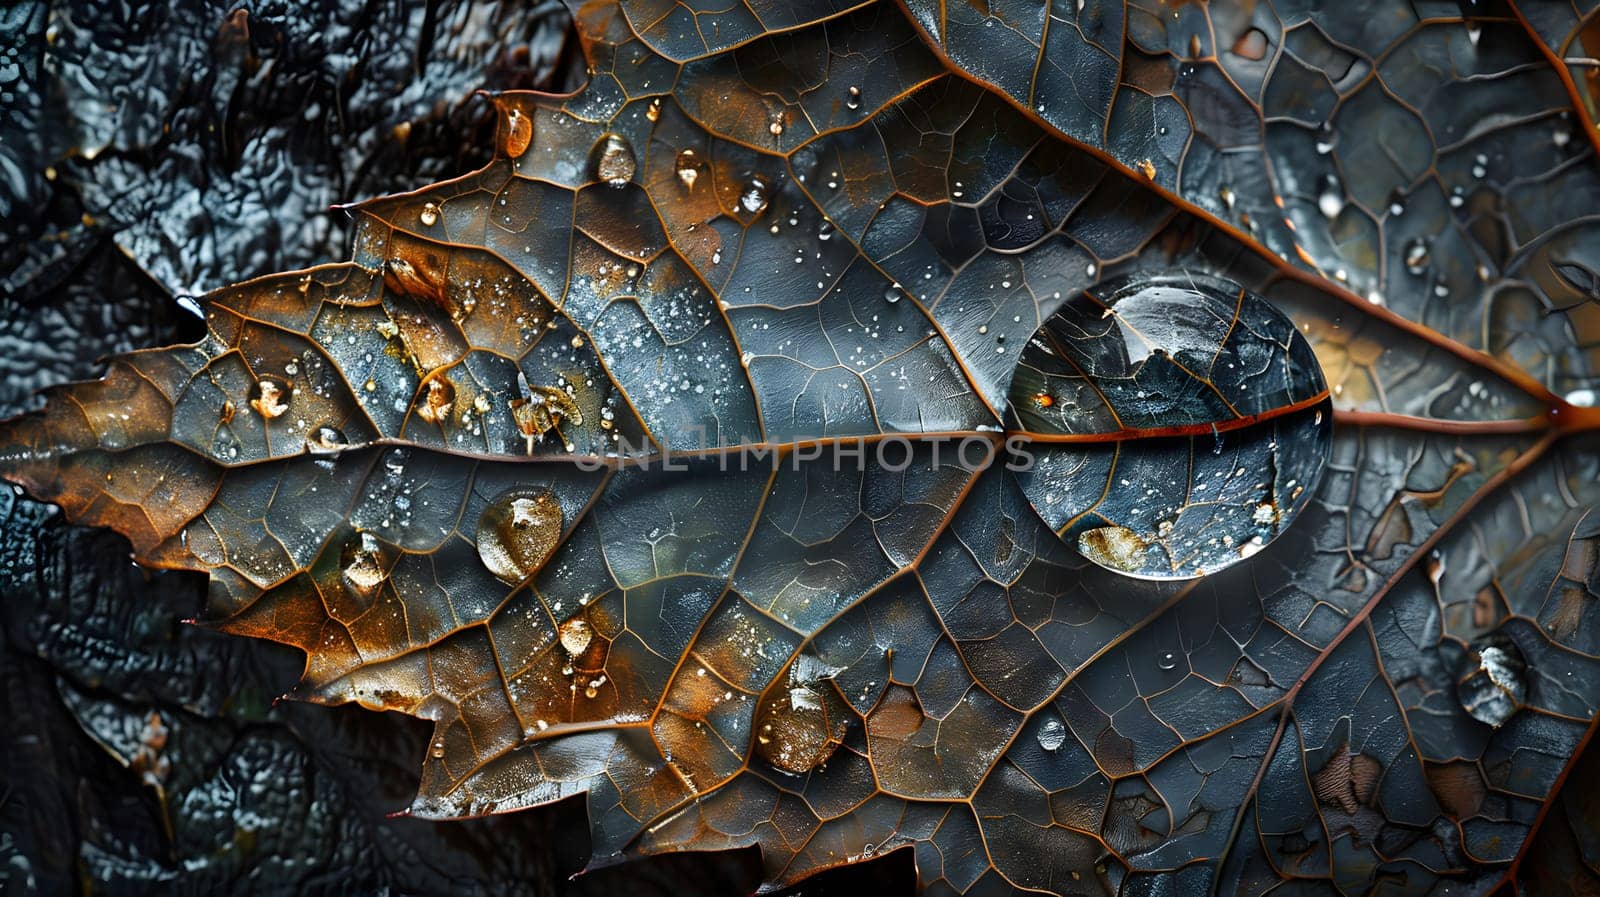 A close up of a leaf with water drops on it, resembling reptile scales. The image captures the beauty of nature, showcasing the intricate details of a terrestrial animals habitat